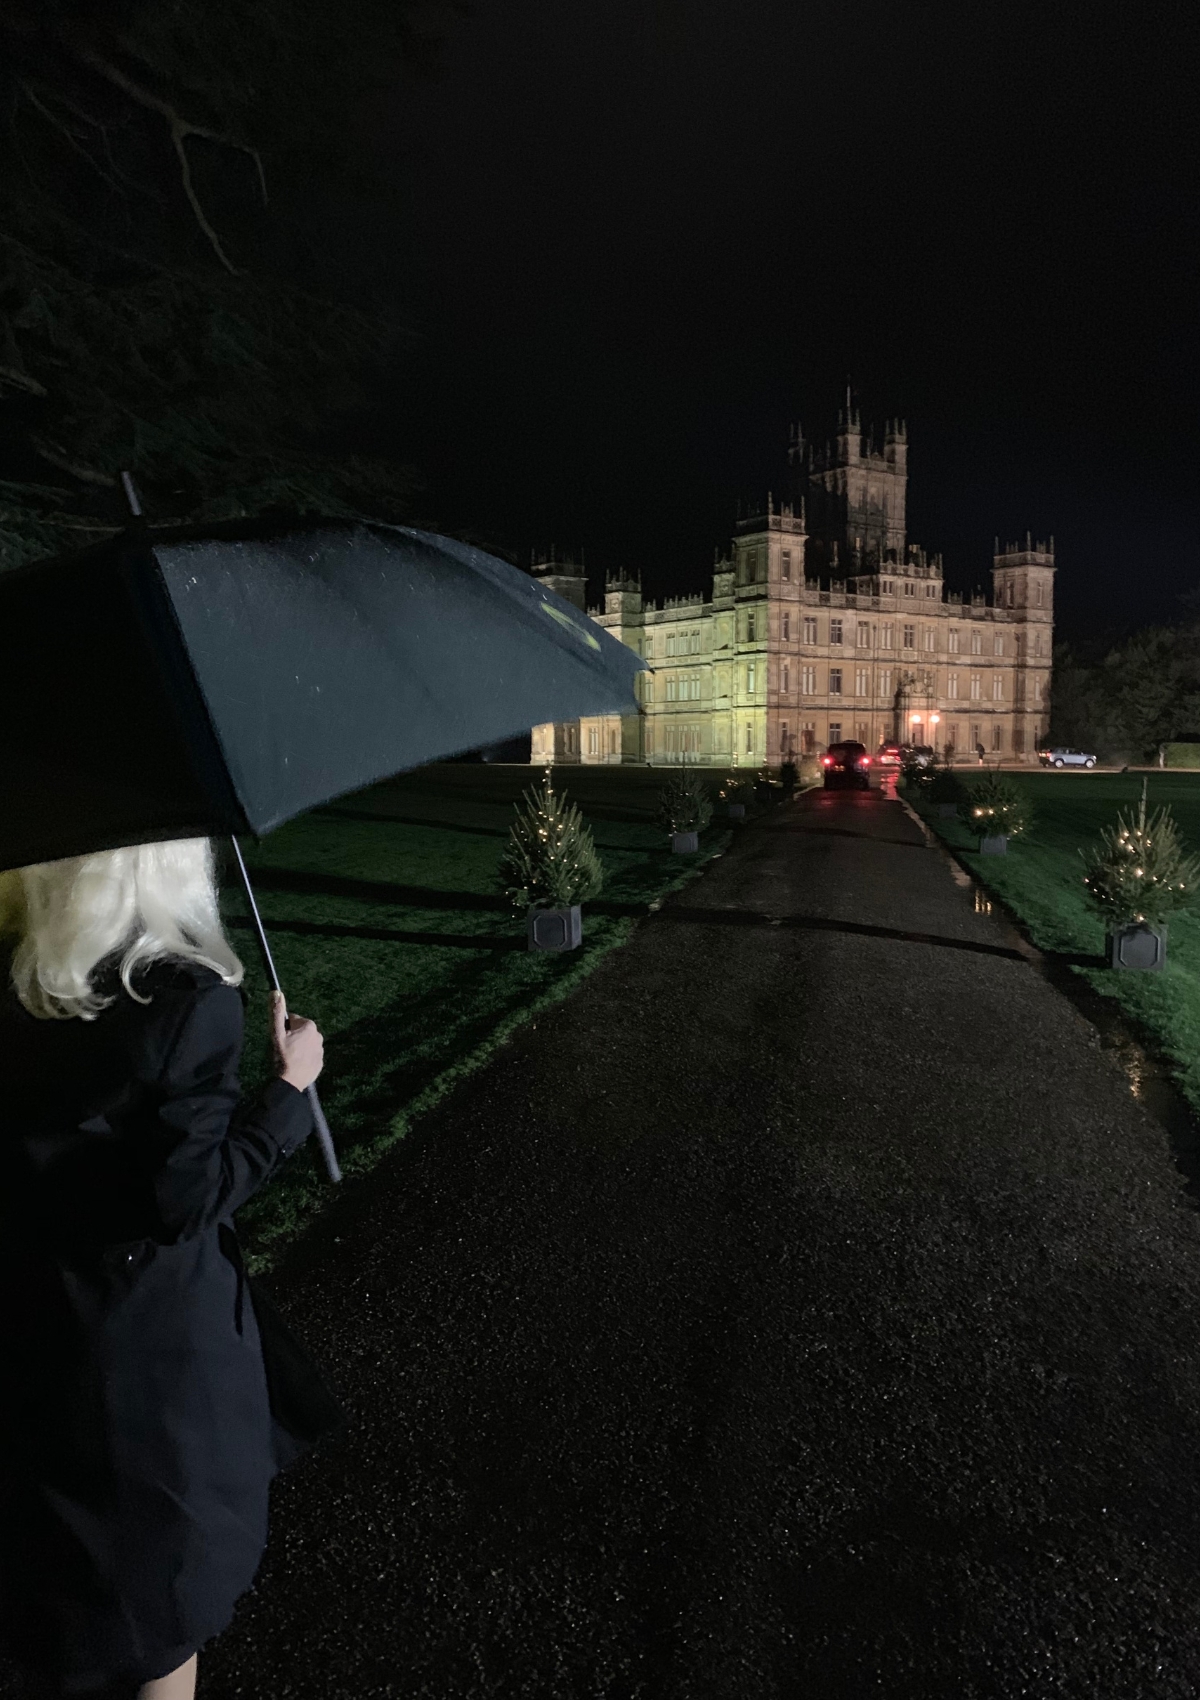 Approaching Highclere Castle on foot at night